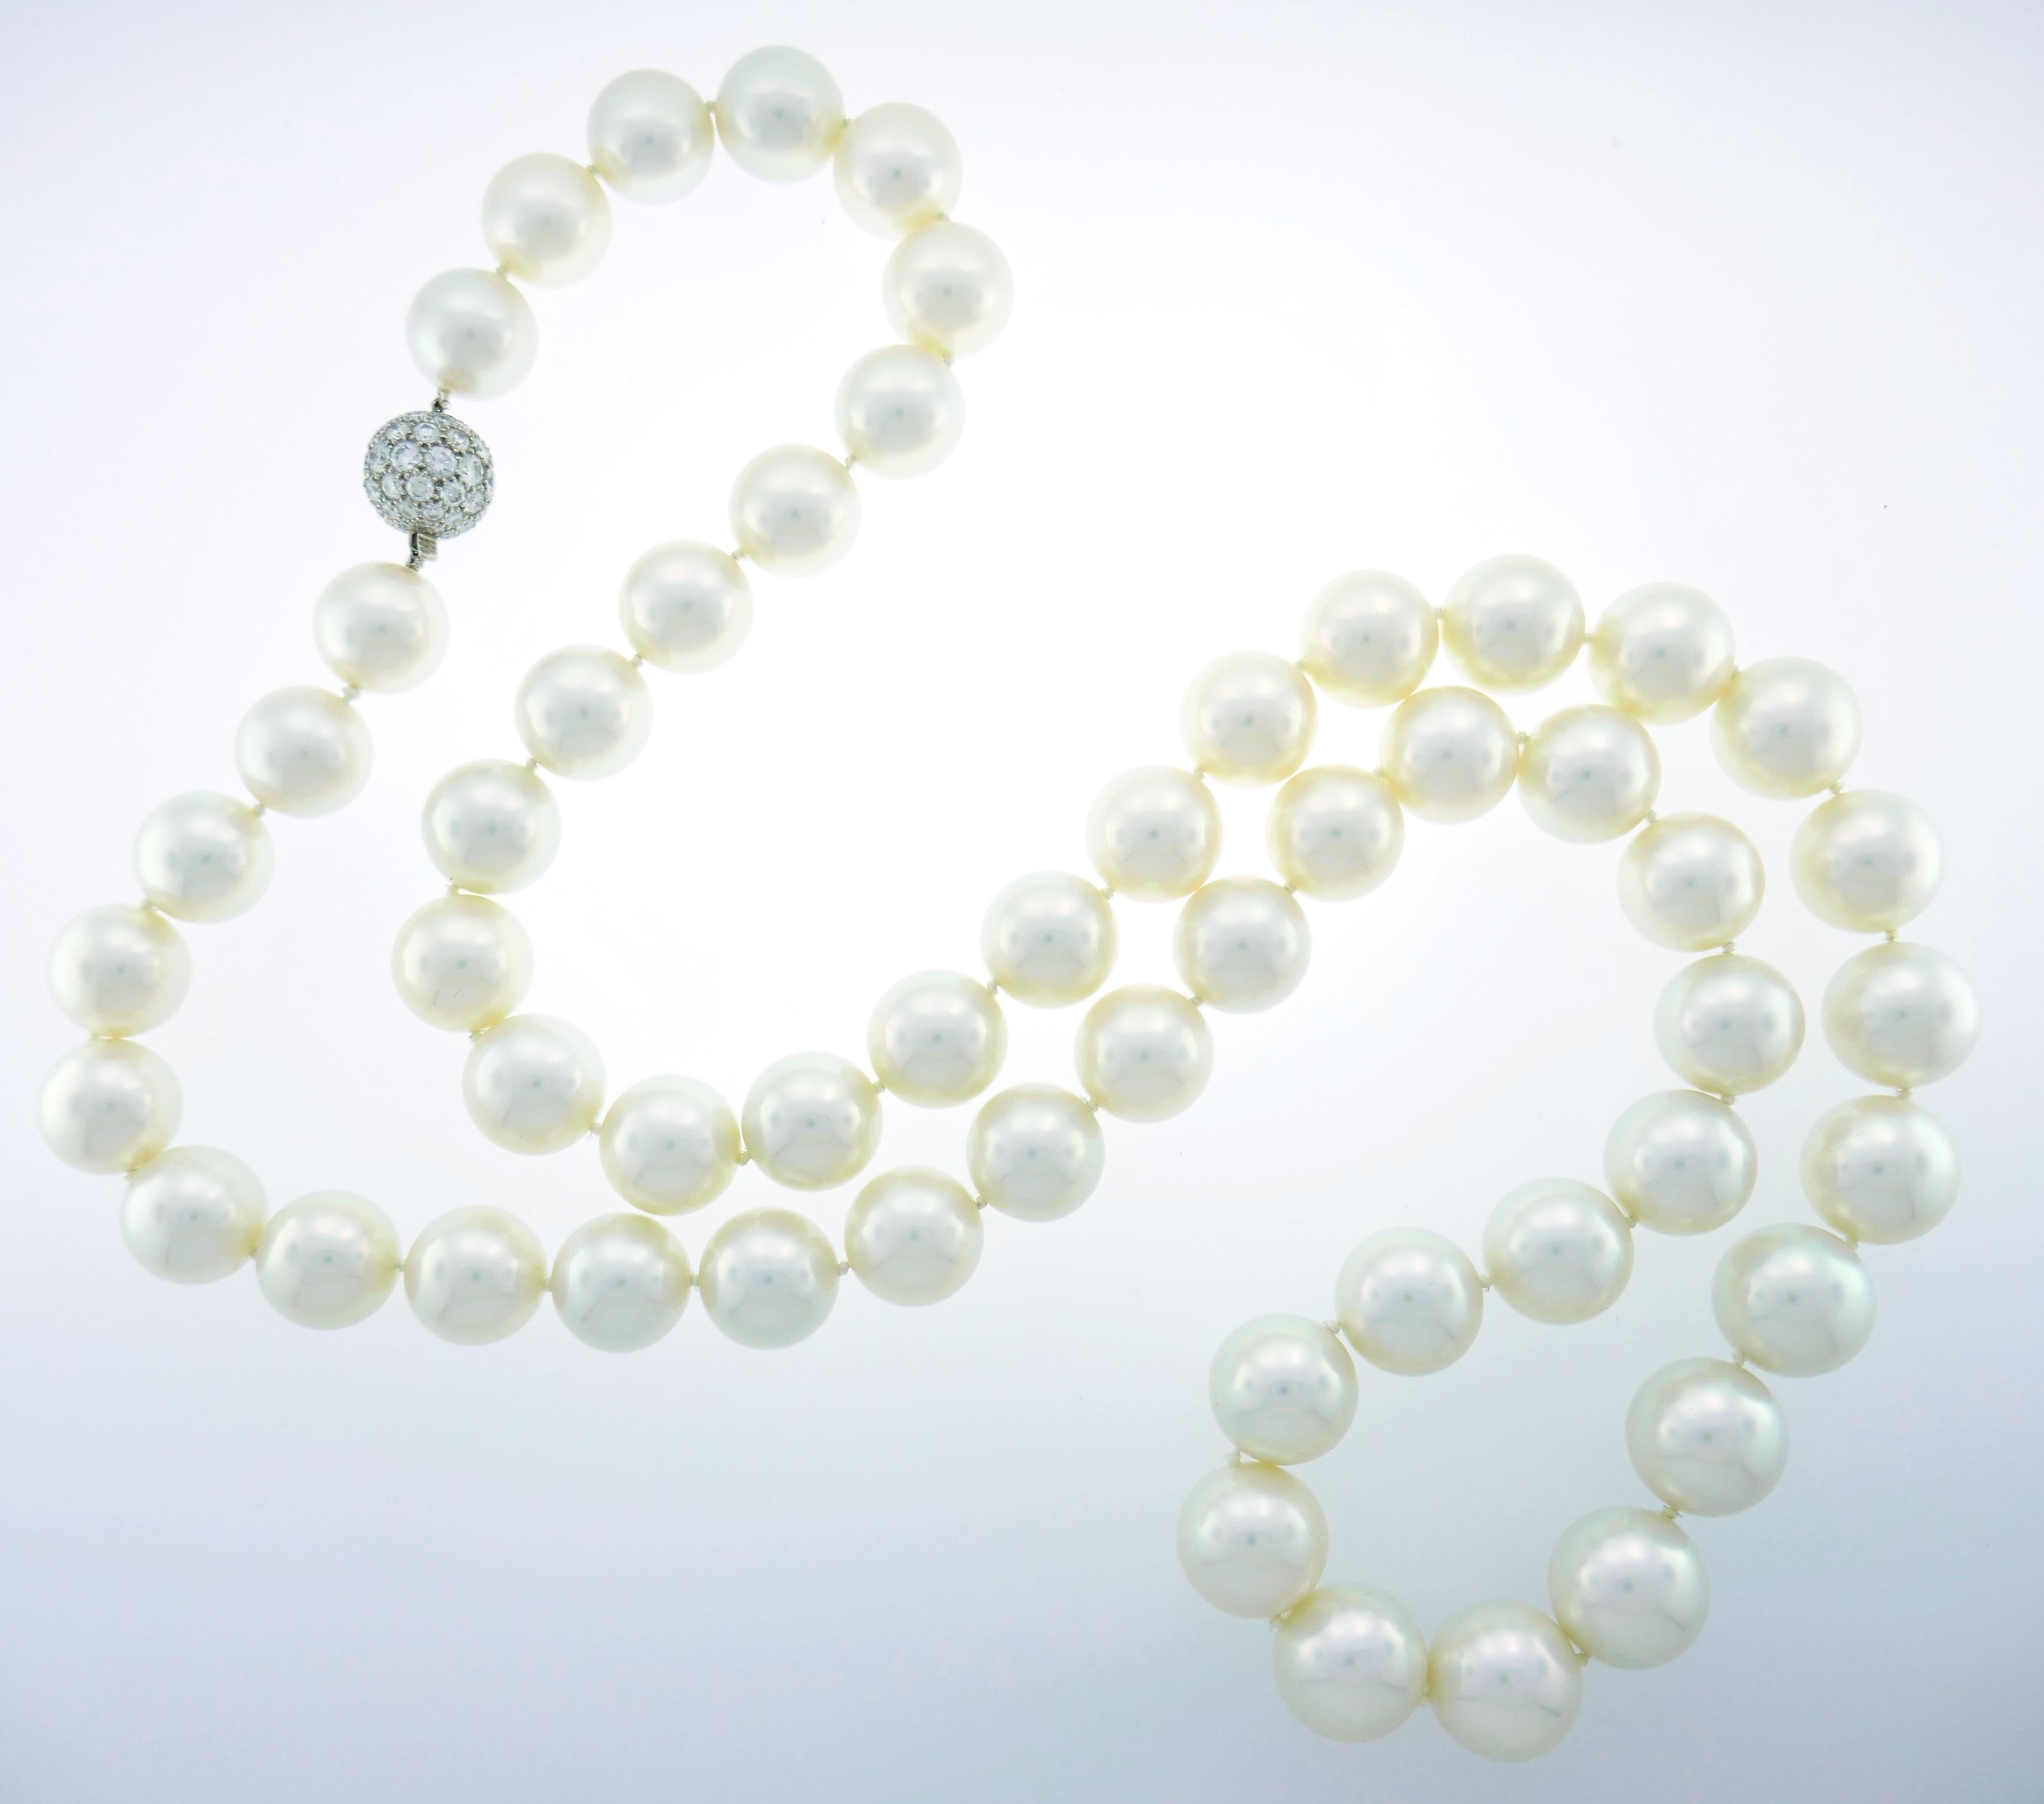 Stunning opera length South Sea pearl strand necklace with a diamond pave clasp created by Tiffany & Co. in 2005. Versatile, classy and timeless! The size and perfect matching of fifty-five pearls graduating from 17.2 mm to 15.2 mm are breathtaking!